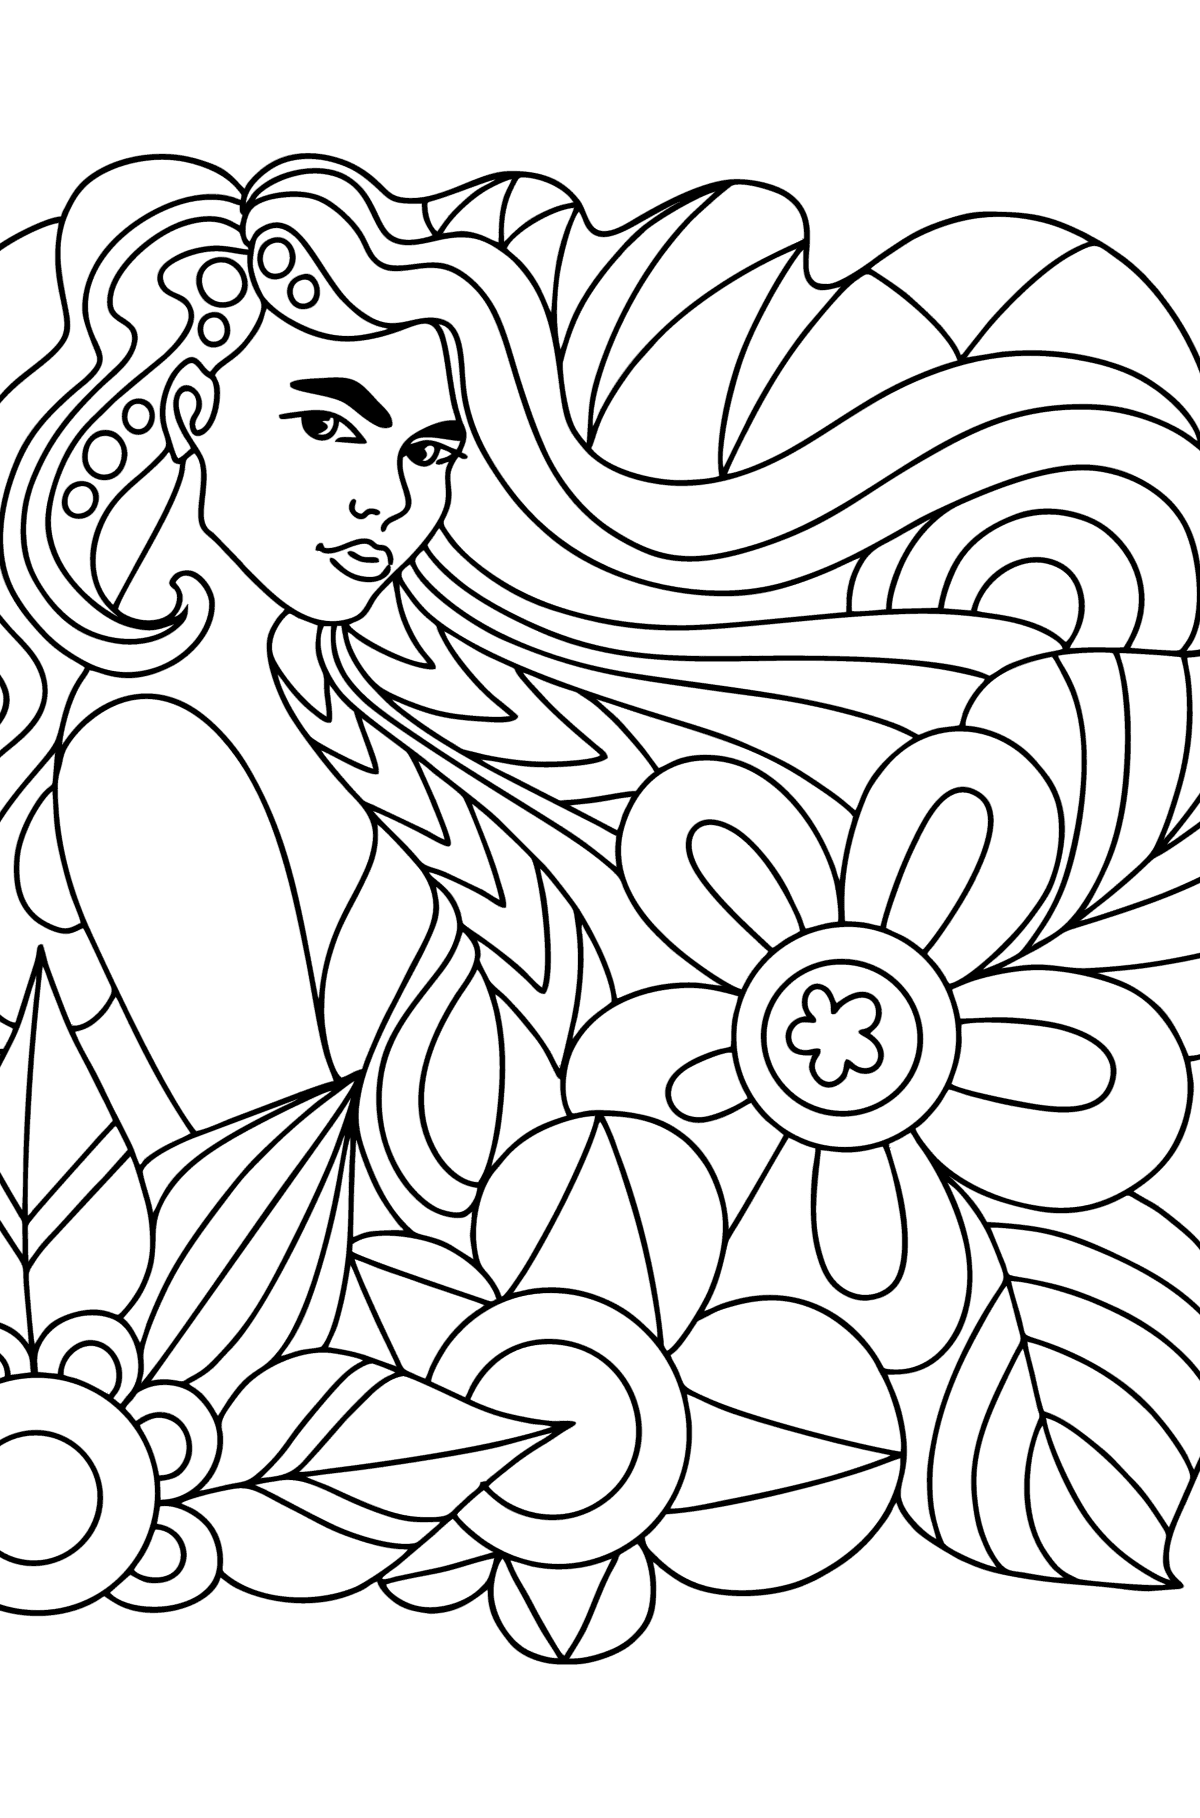 Art Therapy coloring page for kids - Coloring Pages for Kids